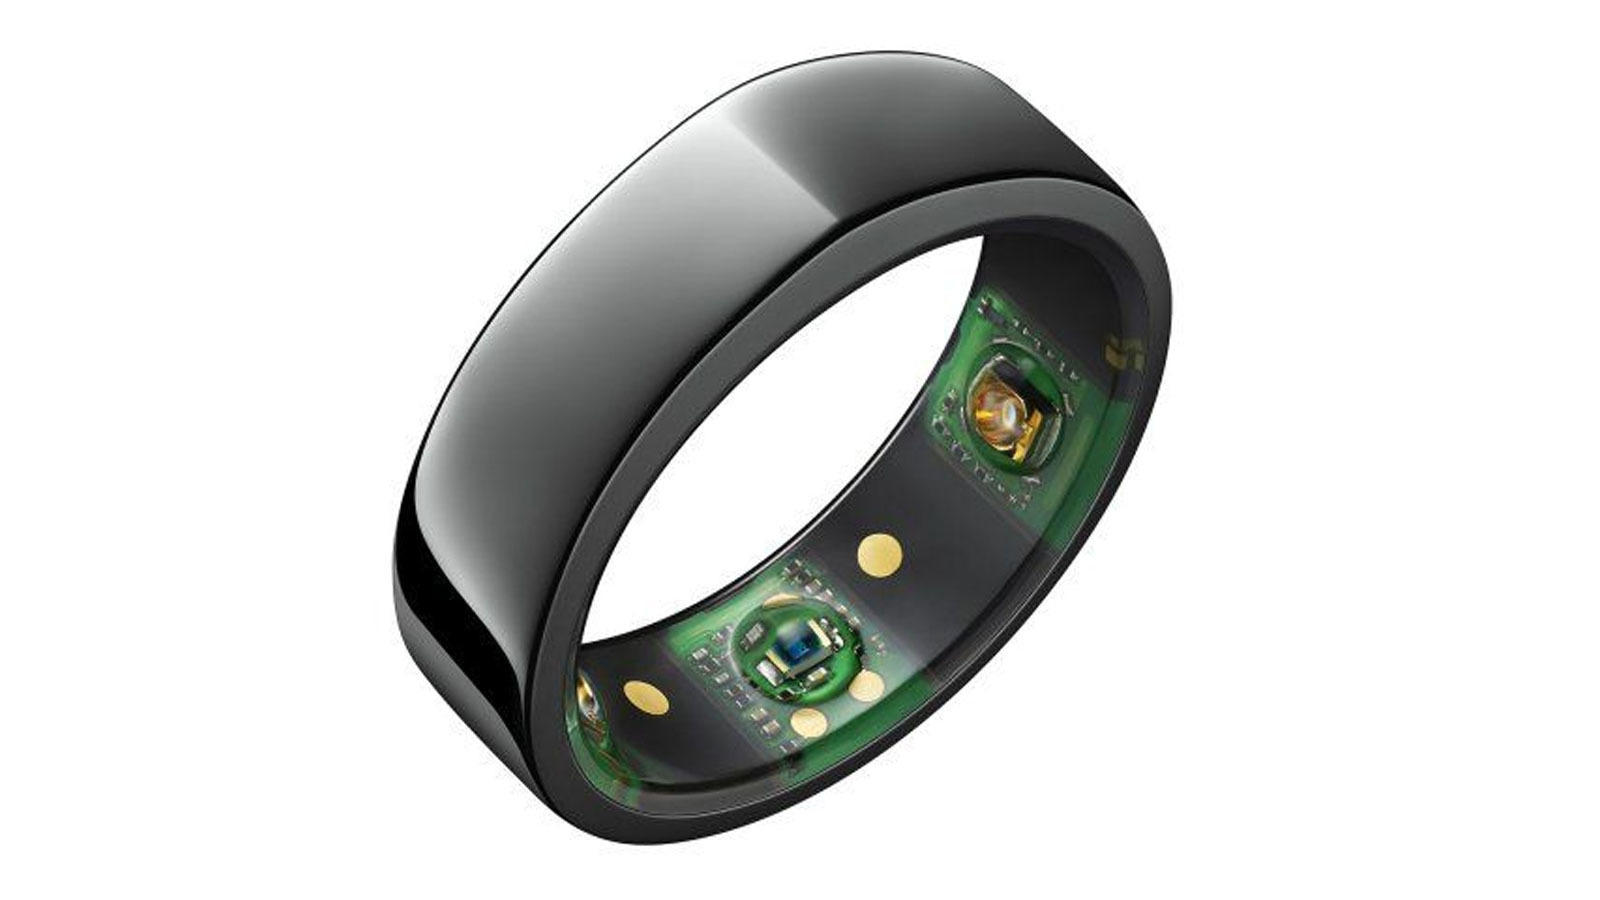 smart ring: This smart ring monitors temperature, can detect Covid